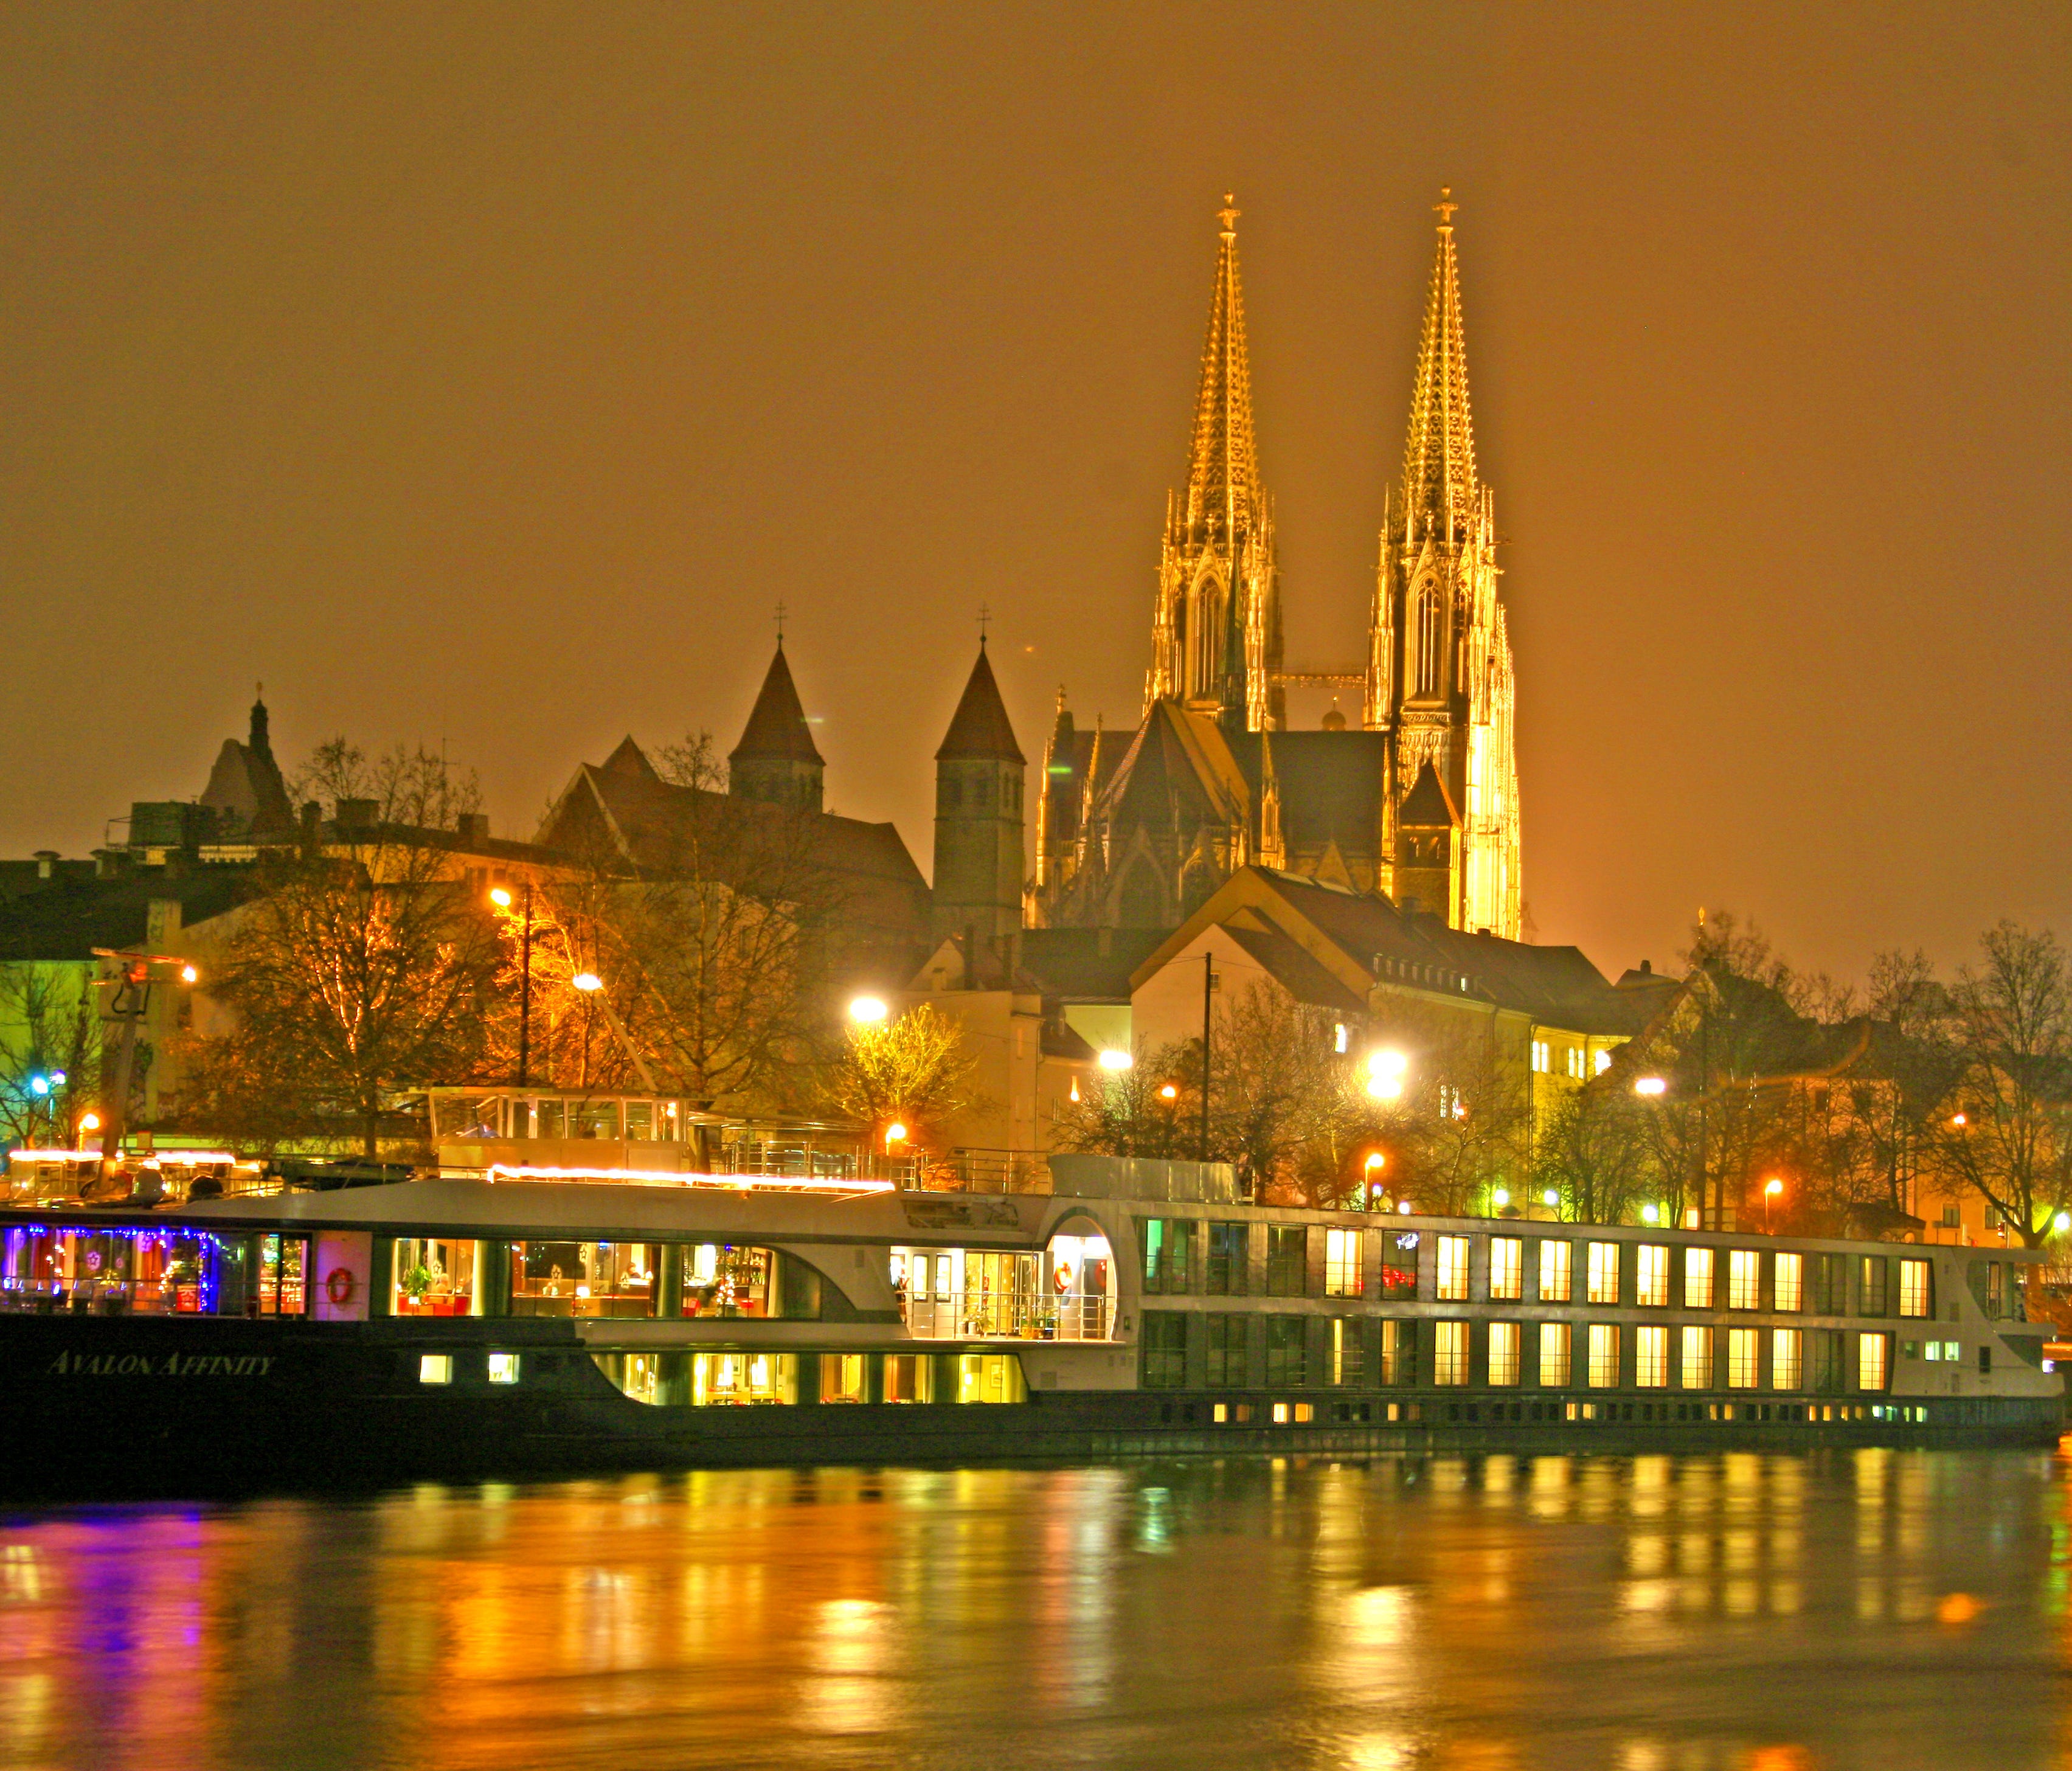 An Avalon Waterways ship  docked in Regensburg, Germany during a Christmas cruise.